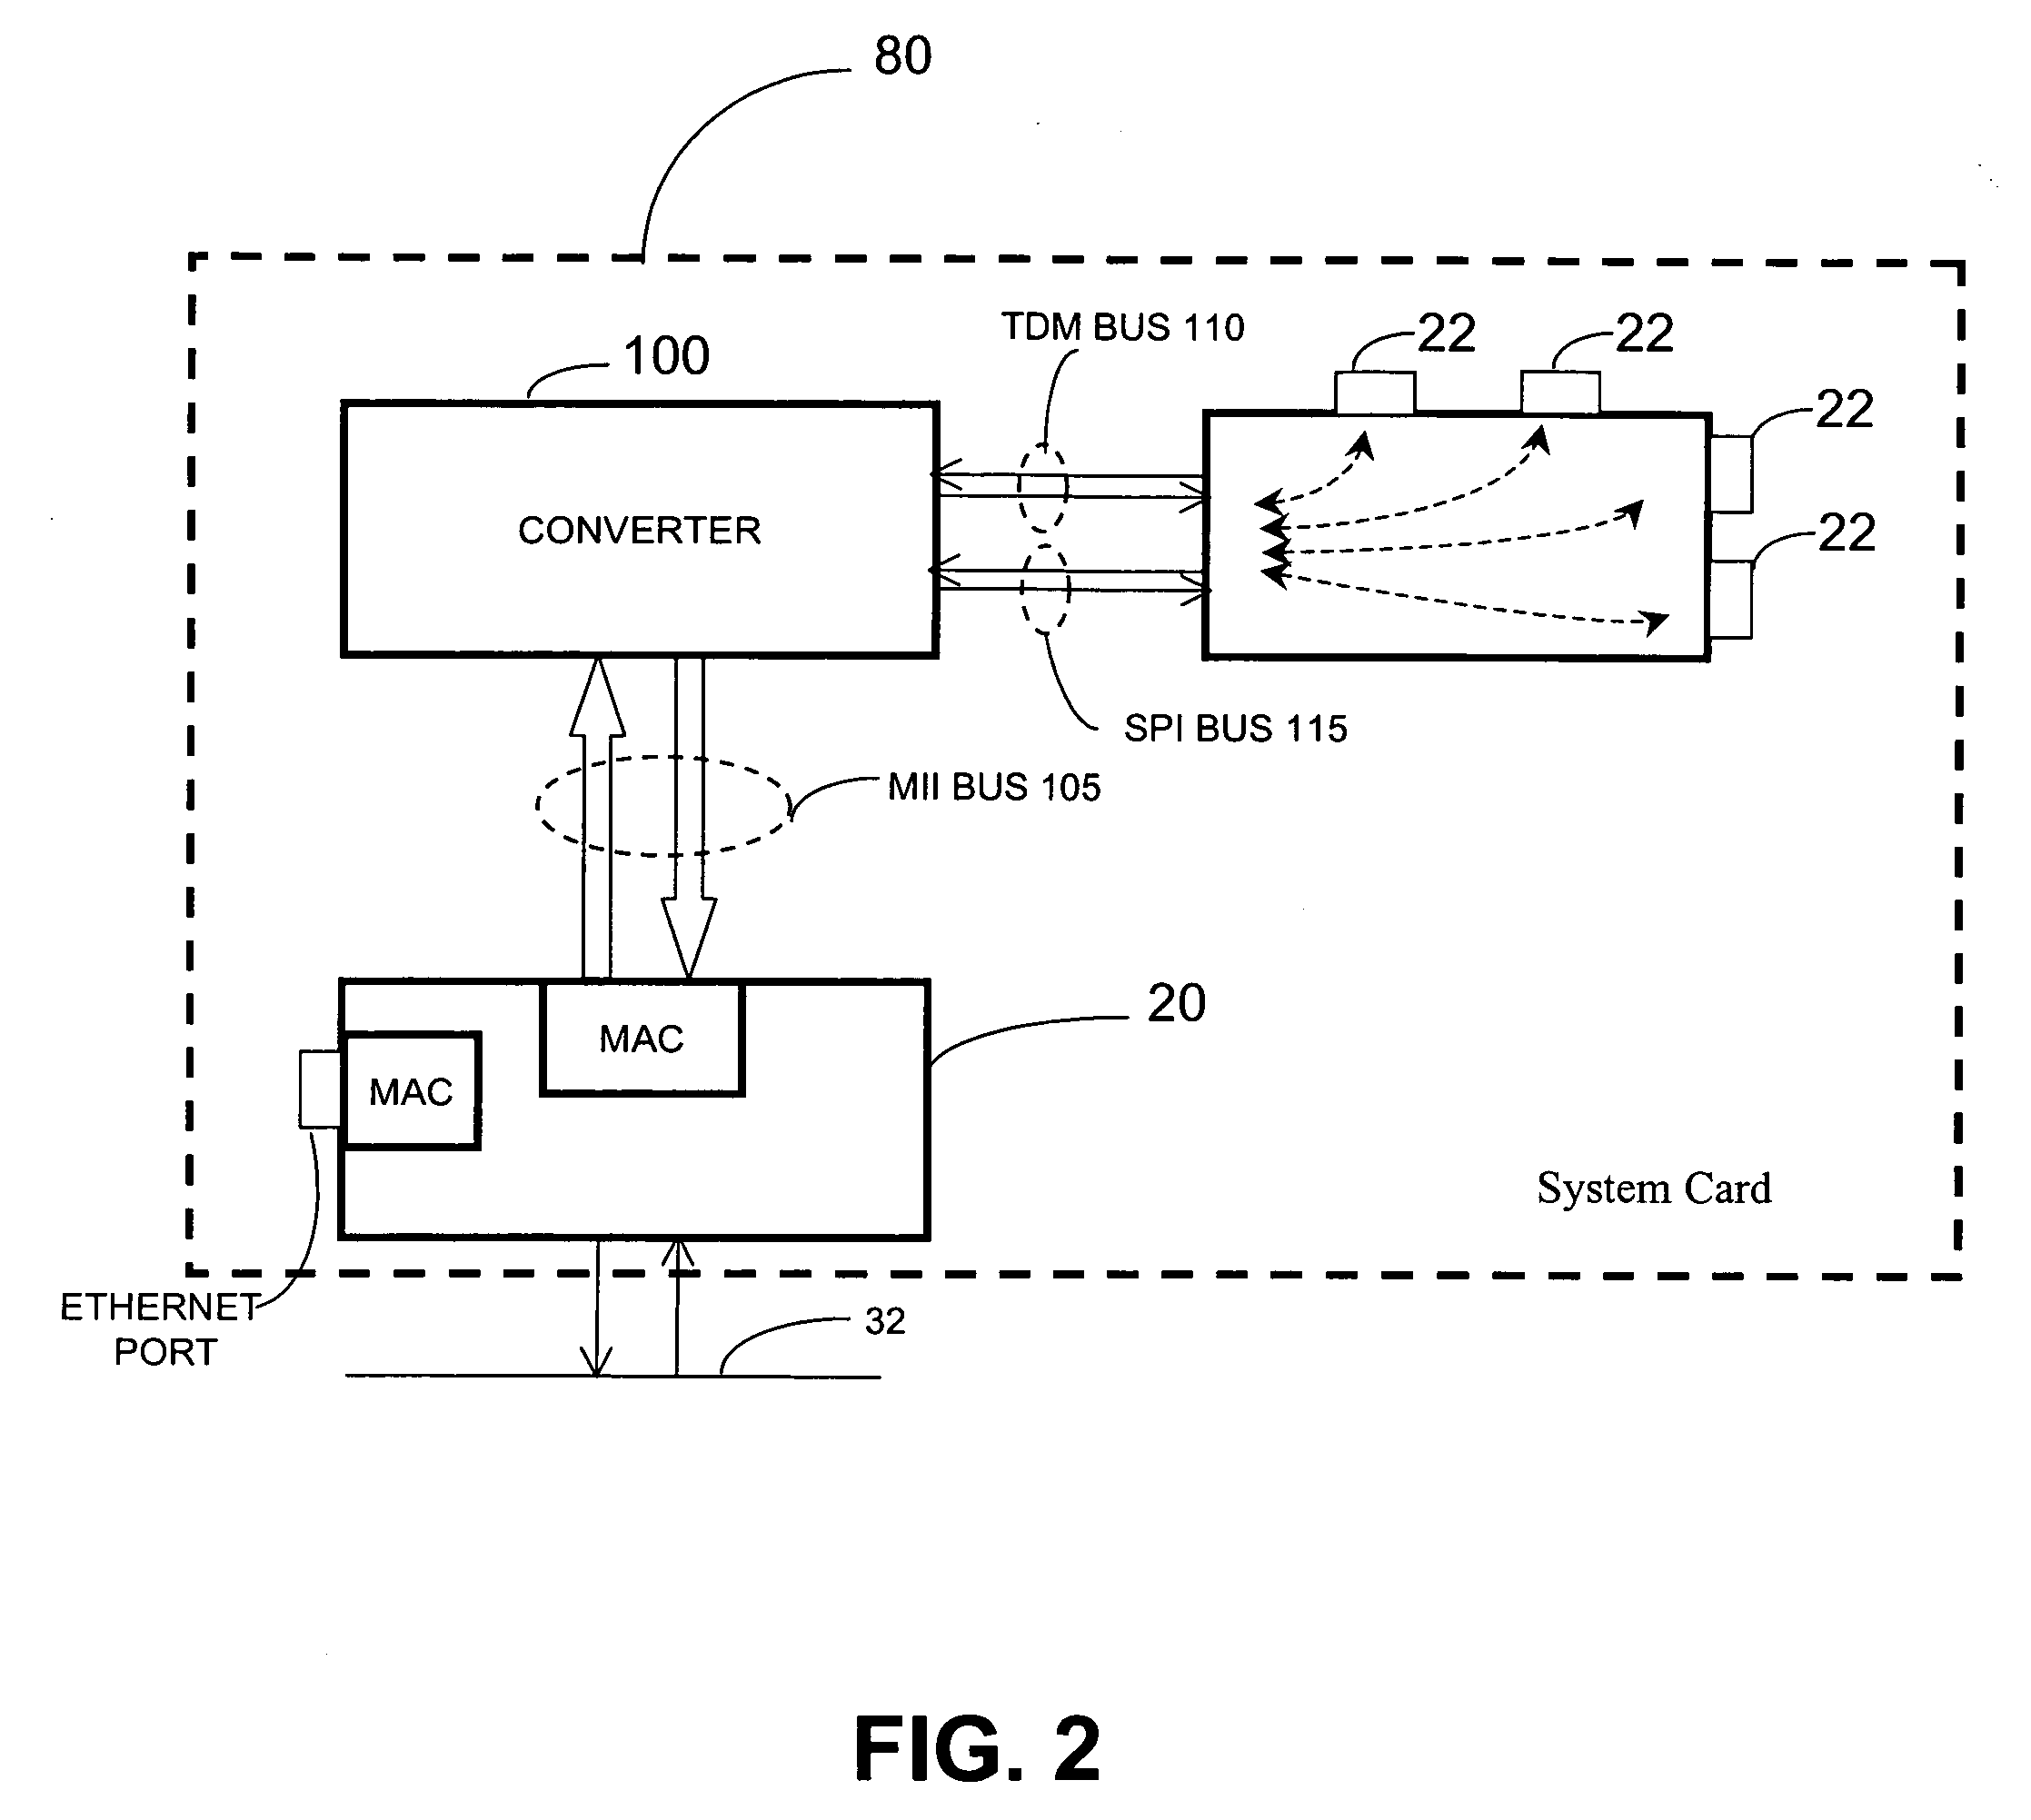 Branch exchange methods and apparatuses for switching telecommunication signals